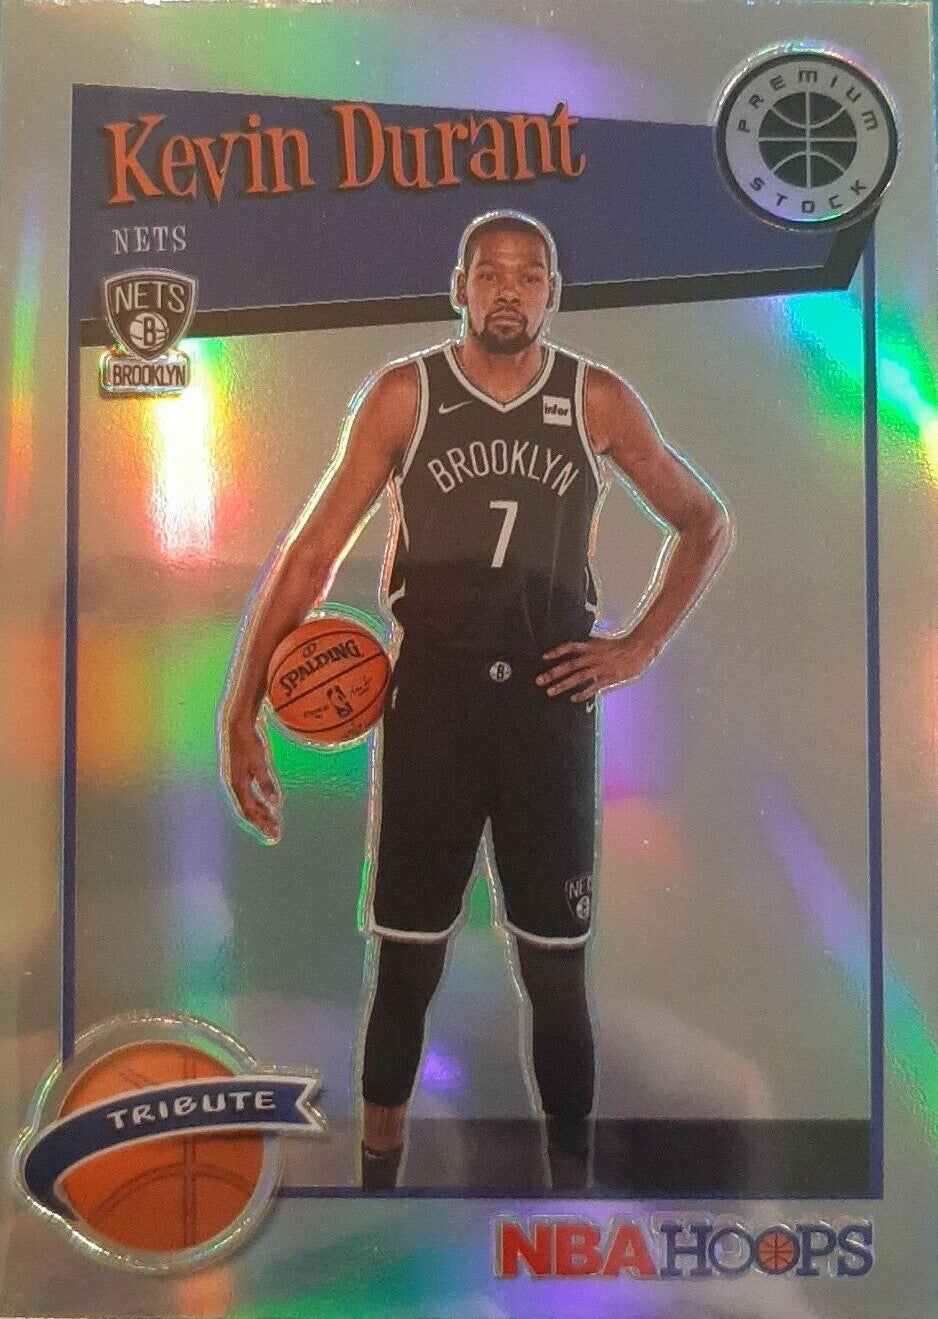 2019-22 Hoops Premium Stock Kevin Durant Tribute Silver Prizm #284 Brooklyn Nets